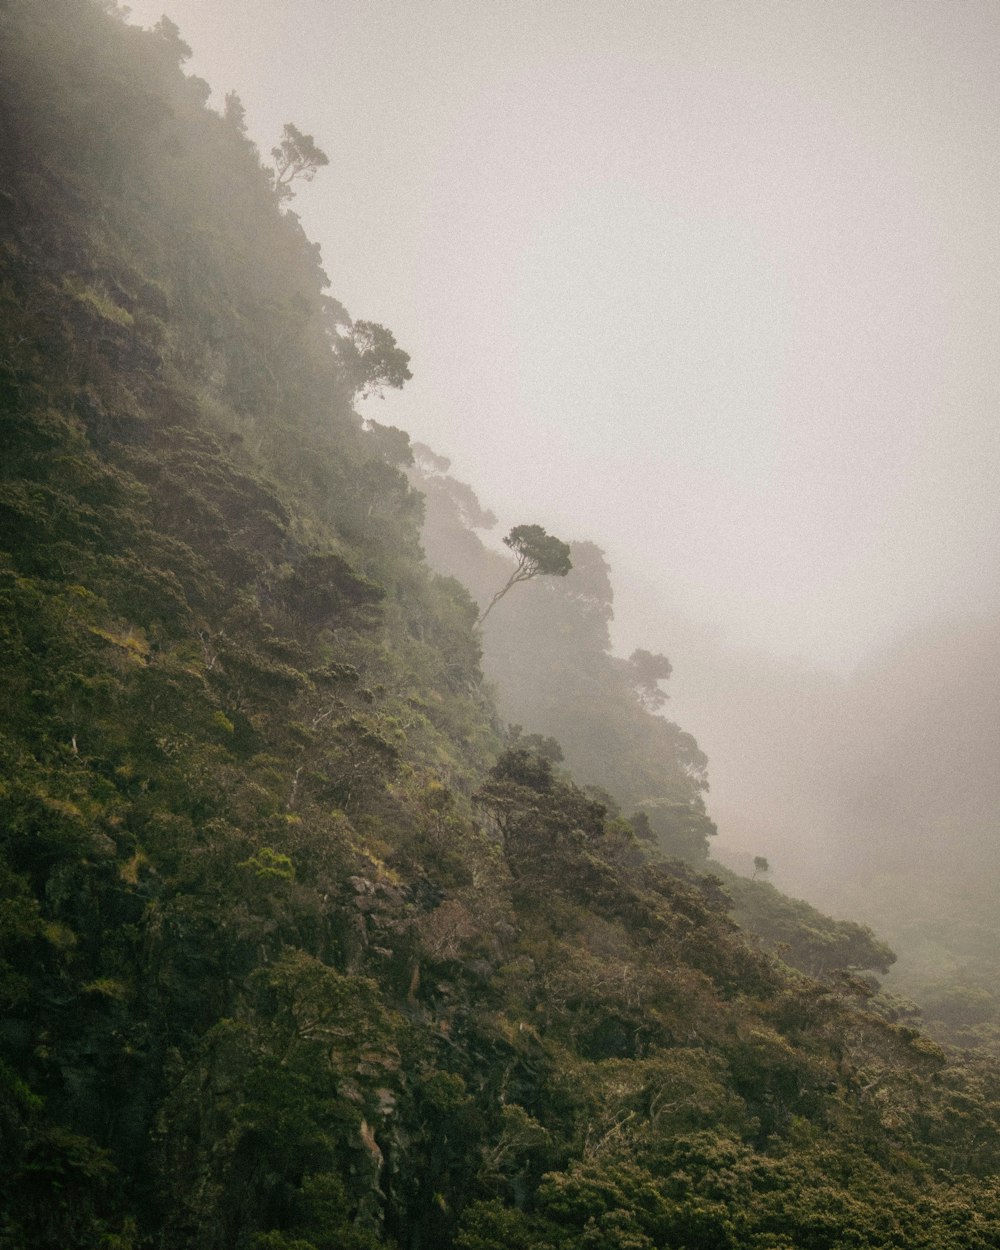 a lone tree on the side of a mountain in the fog